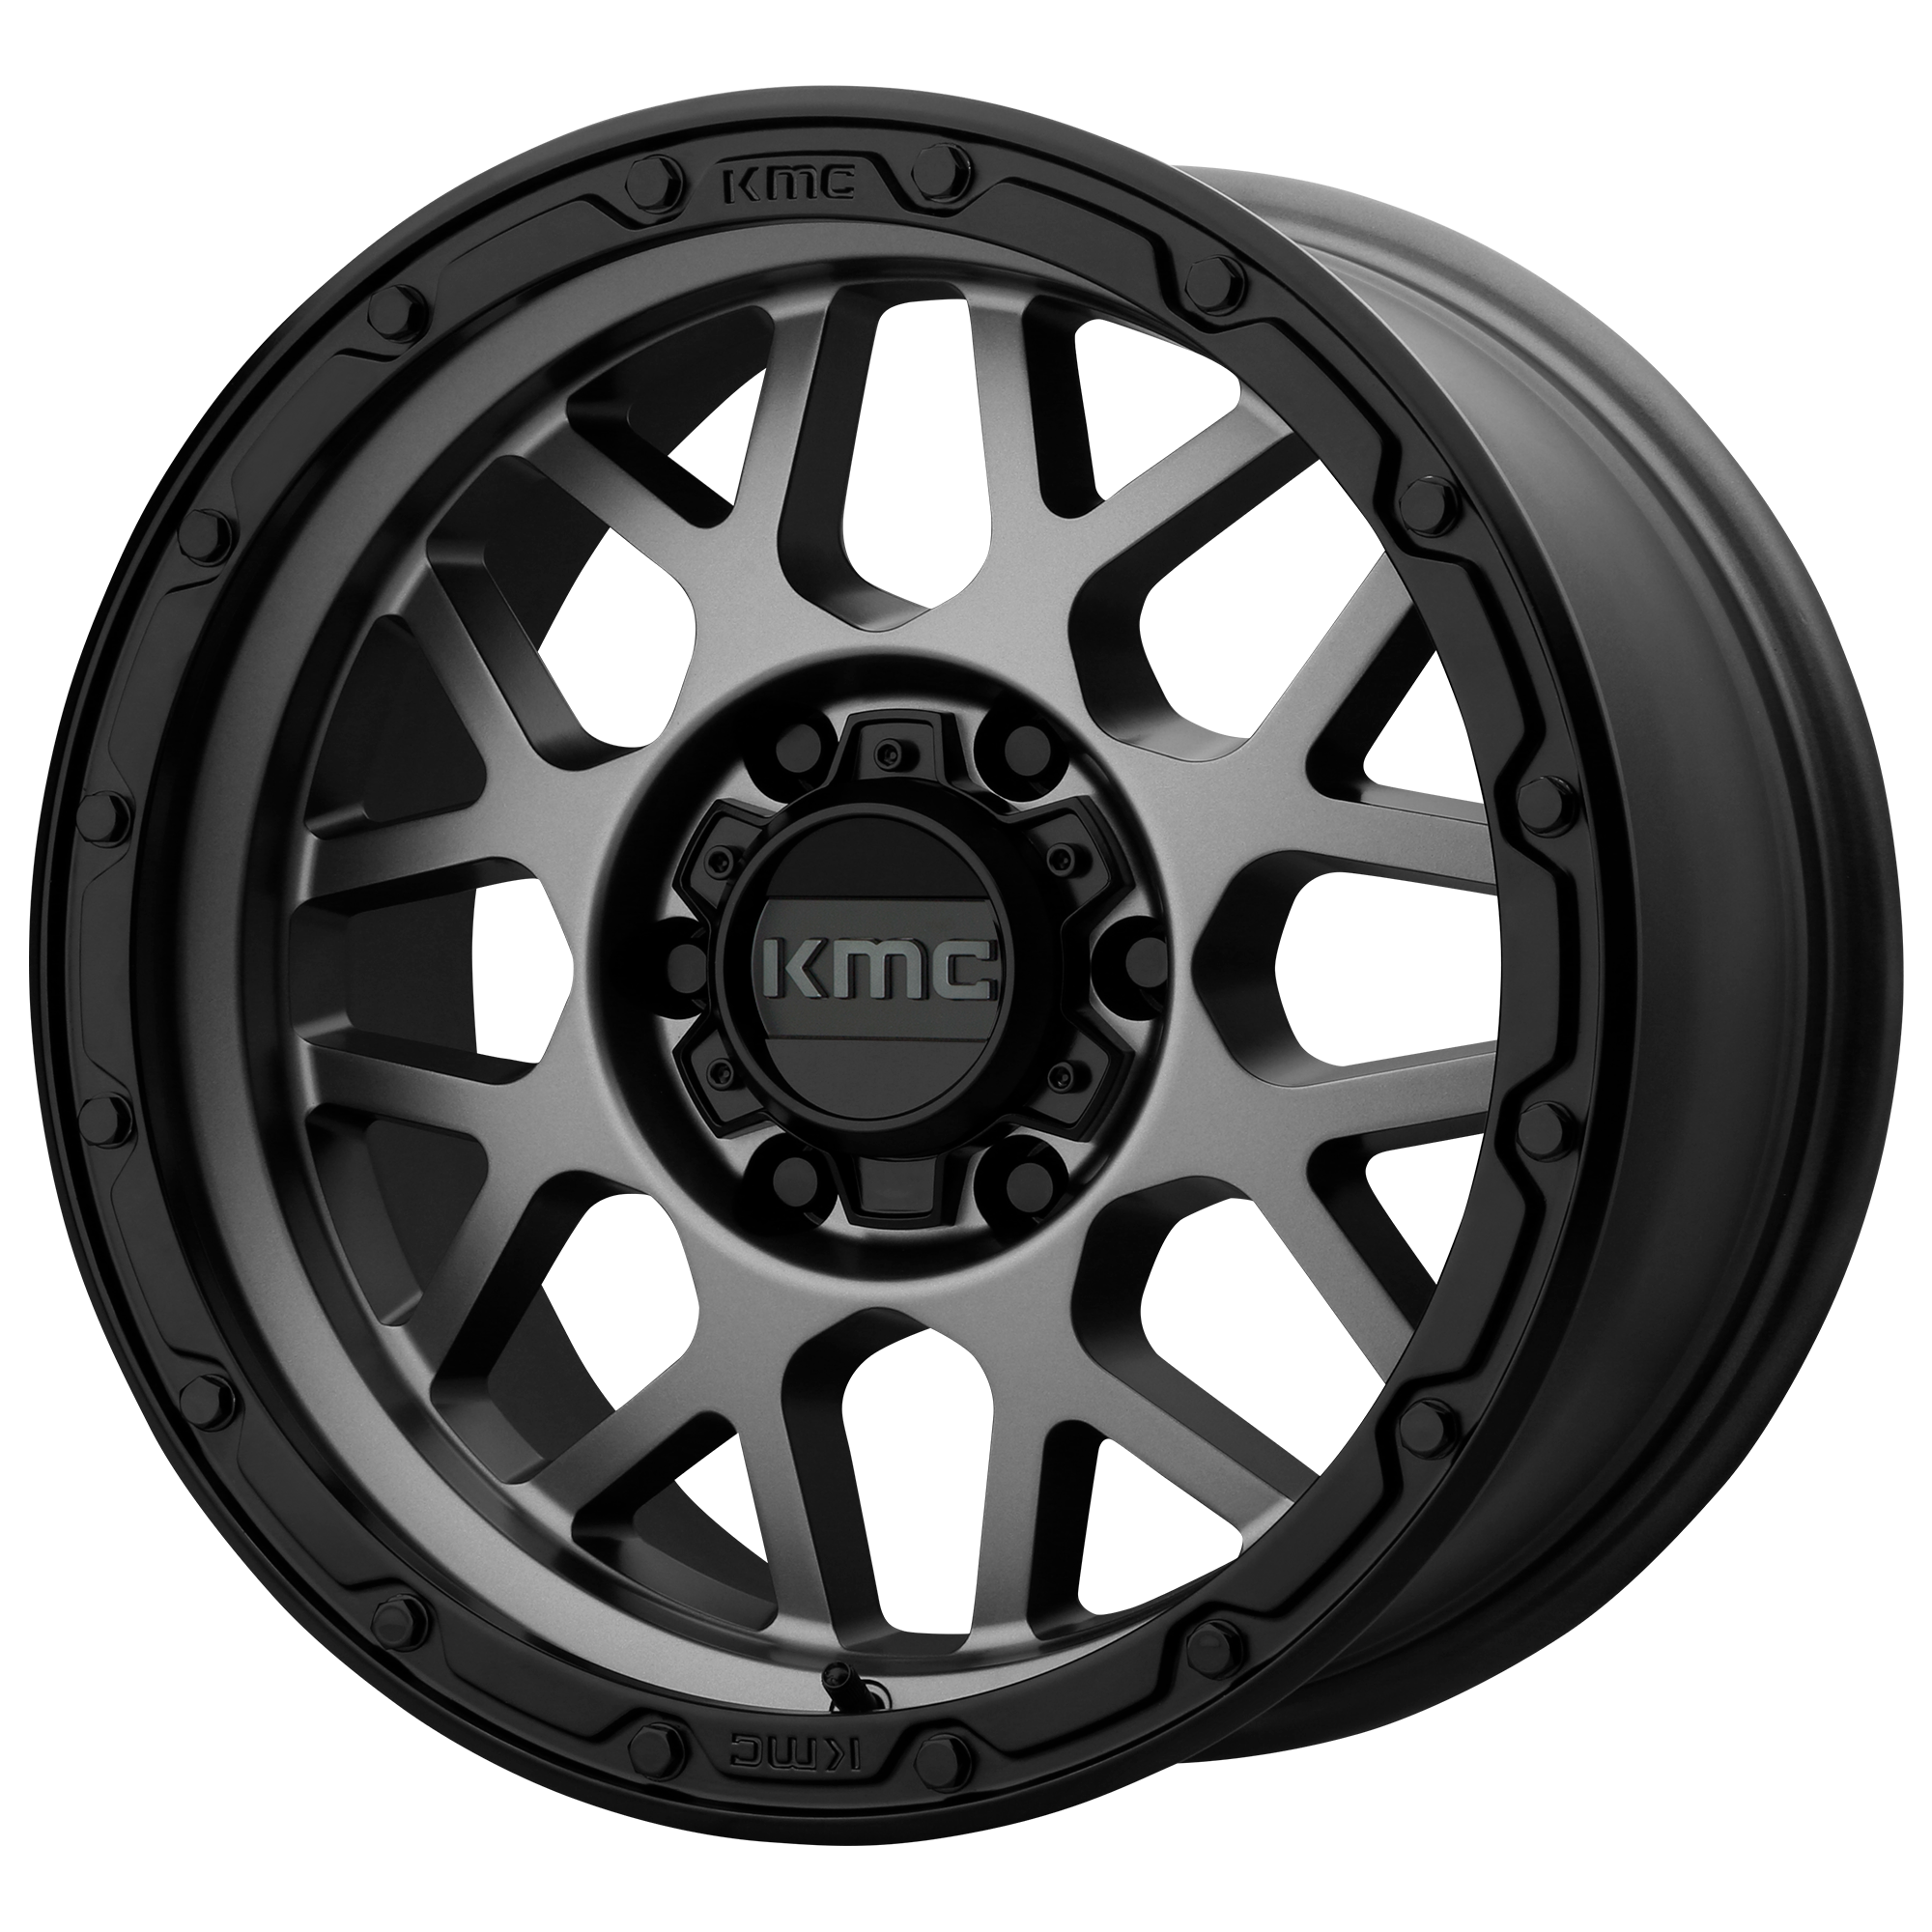 GRENADE OFF-ROAD 17x8.5 6x120.00 MATTE GRAY W/ MATTE BLACK LIP (0 mm) - Tires and Engine Performance